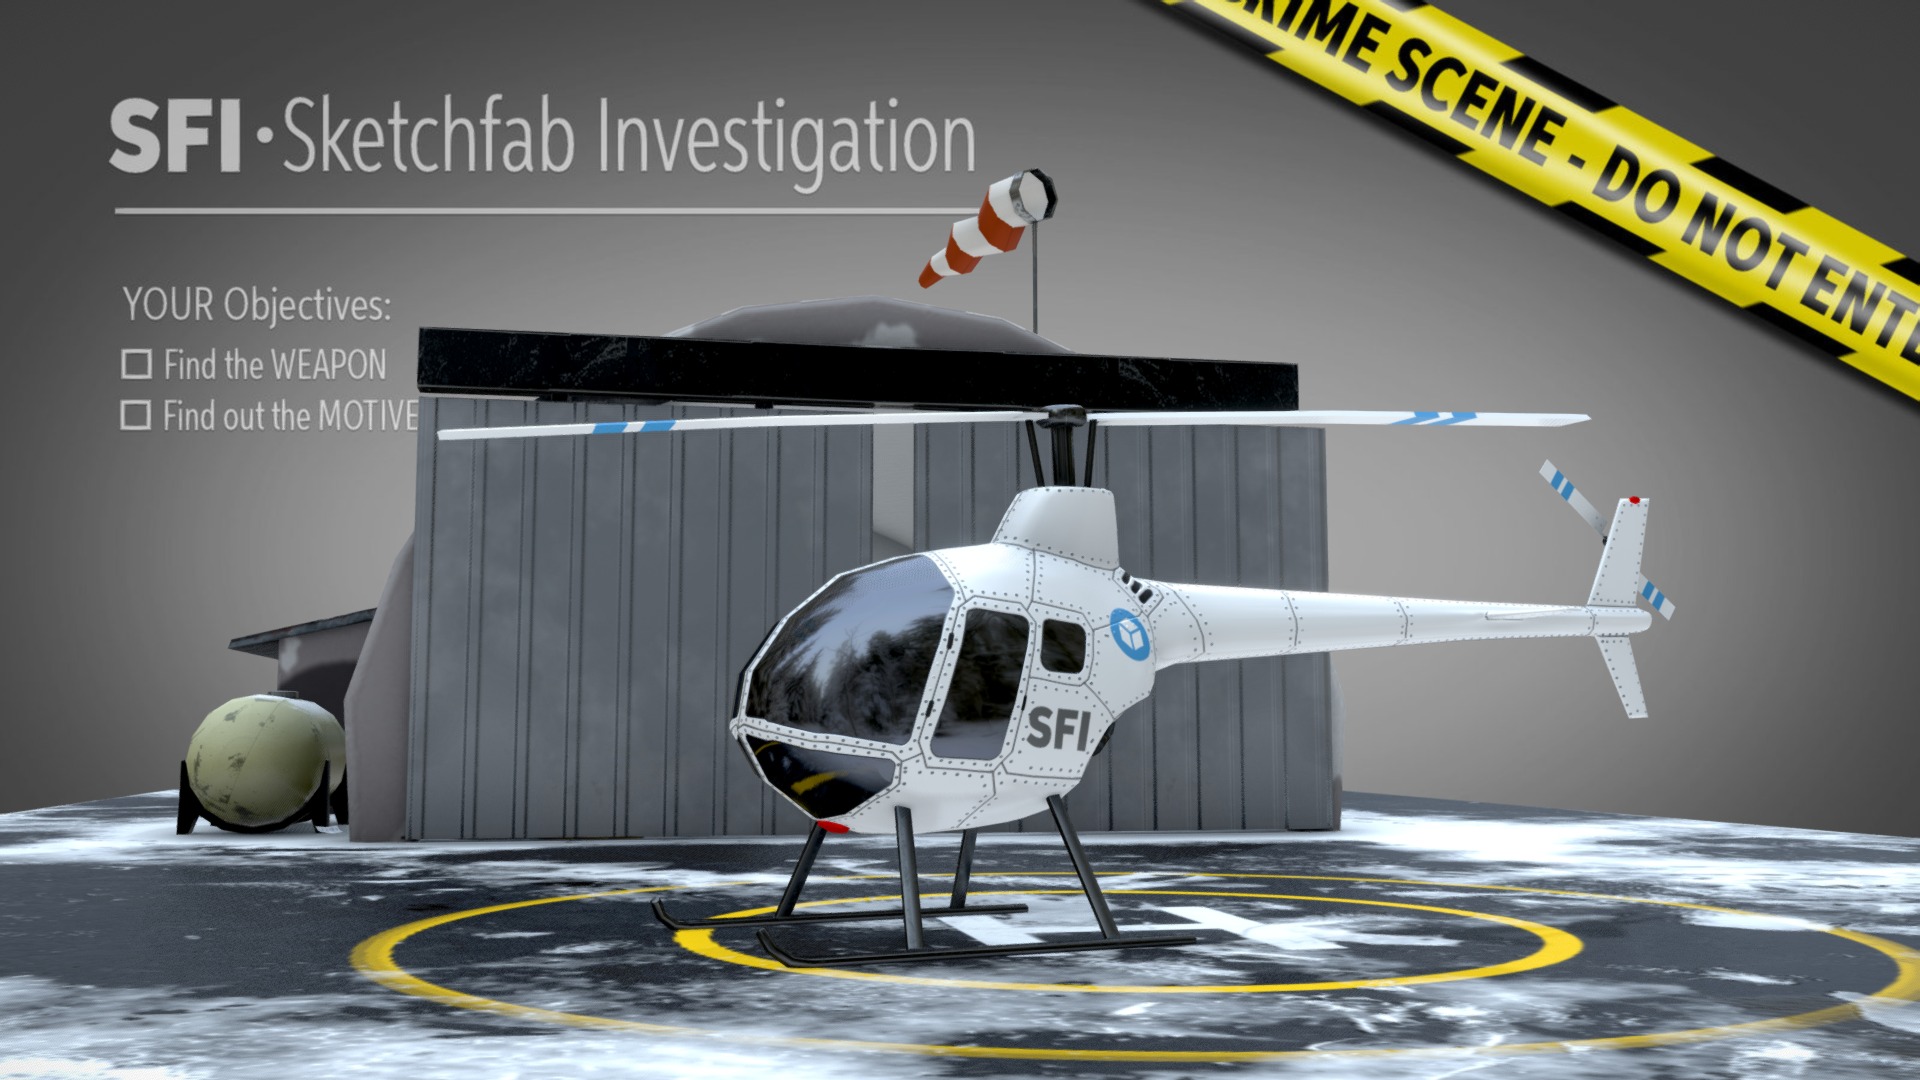 **Welcome SFI-Agent! **

A new Sketchfab Investigation is waiting for you. Here is your briefing:

There is a dead male person, about 30 years old. The Forensics has taken the body from the scene. We can start from a murderer! 
The person who runs this outpost, Tim Berland, is arrested but says nothing. Now we we must rely on your intuition and analytical skills.

Your Objective:




Find the WEAPON

Find out the MOTIVE

Contact Robert Kotsch private (PLEASE NO PUBLIC COMMENT to keep the fun for all) with your results.

Good luck!

*** Click Annotation 1 to start ***



Tech Specs:

under 5k verts

2k map for environment

2k map for the helicopter - Sketchfab Investigation: "A cold death" - 3D model by Robert Kotsch (@robertkotsch) 3d model